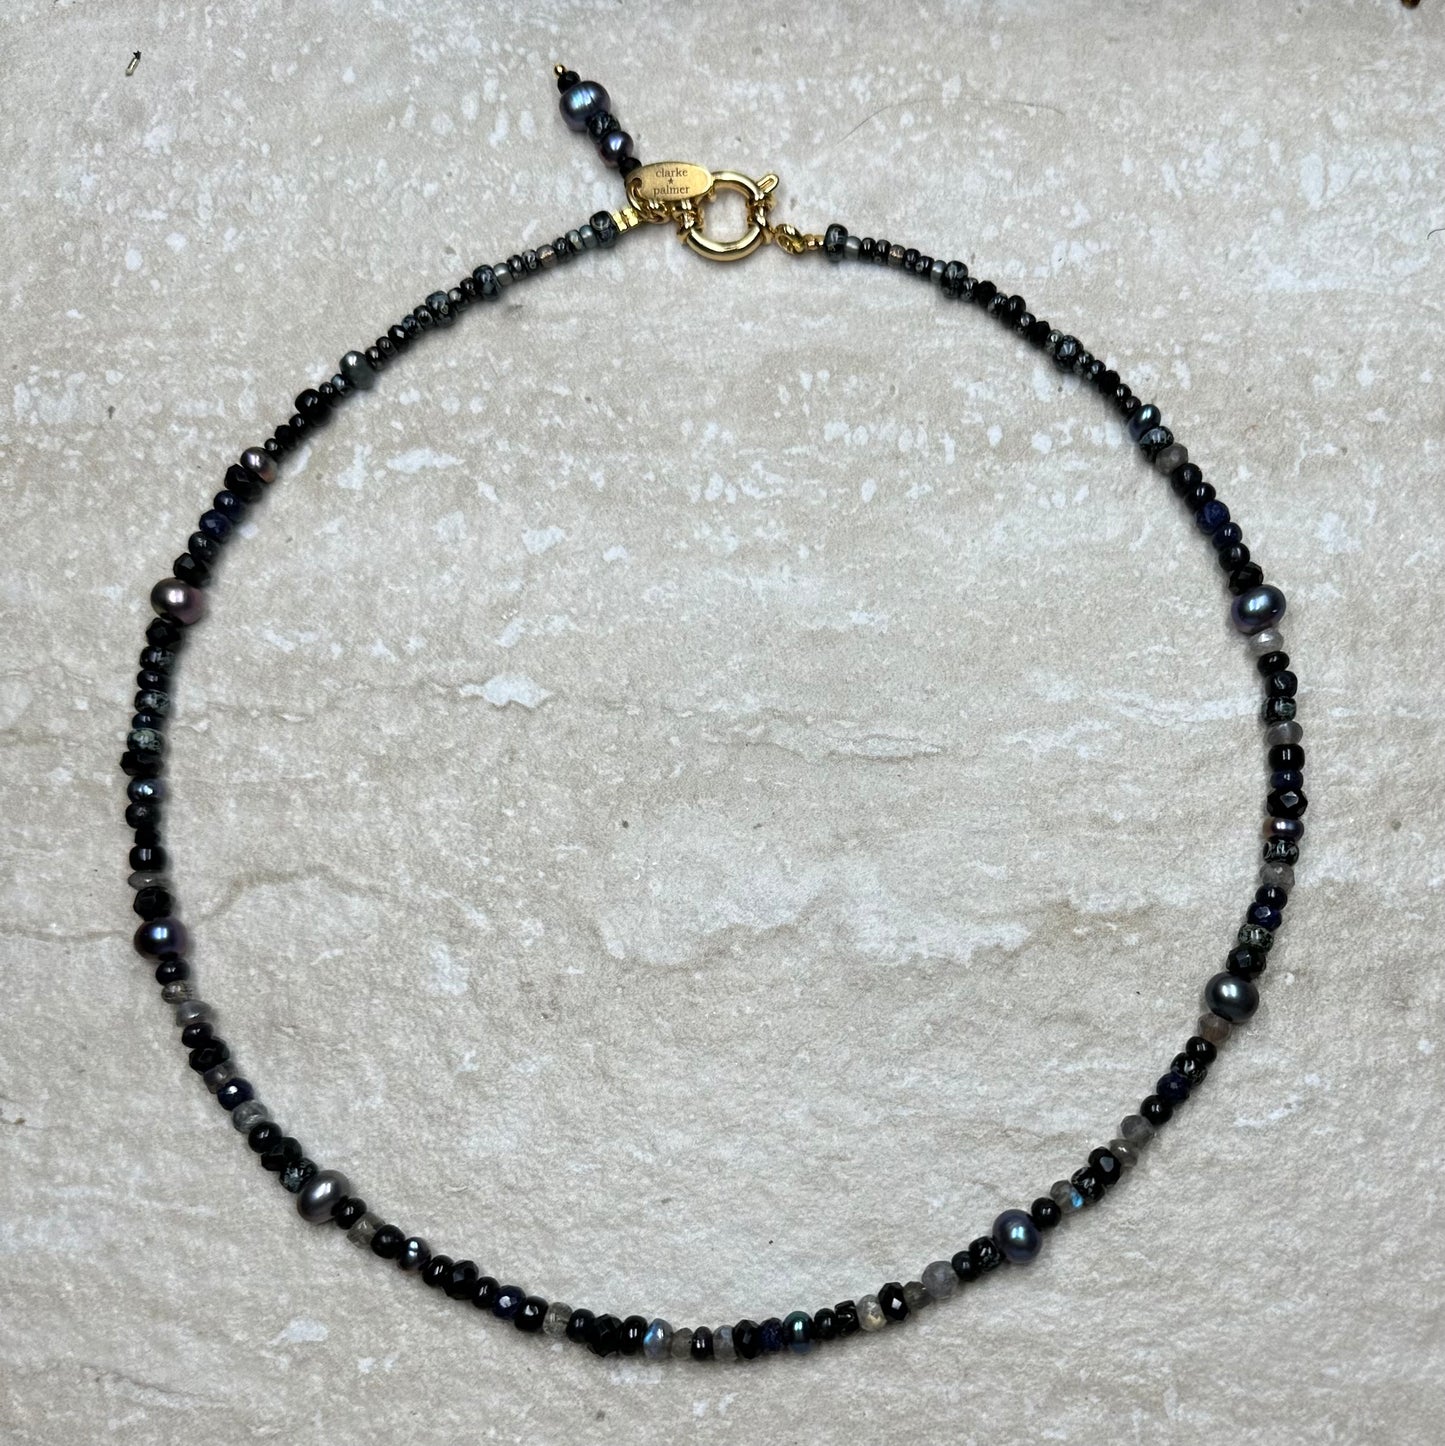 Black Pearl Spinel & Moonstone Pendant Necklace